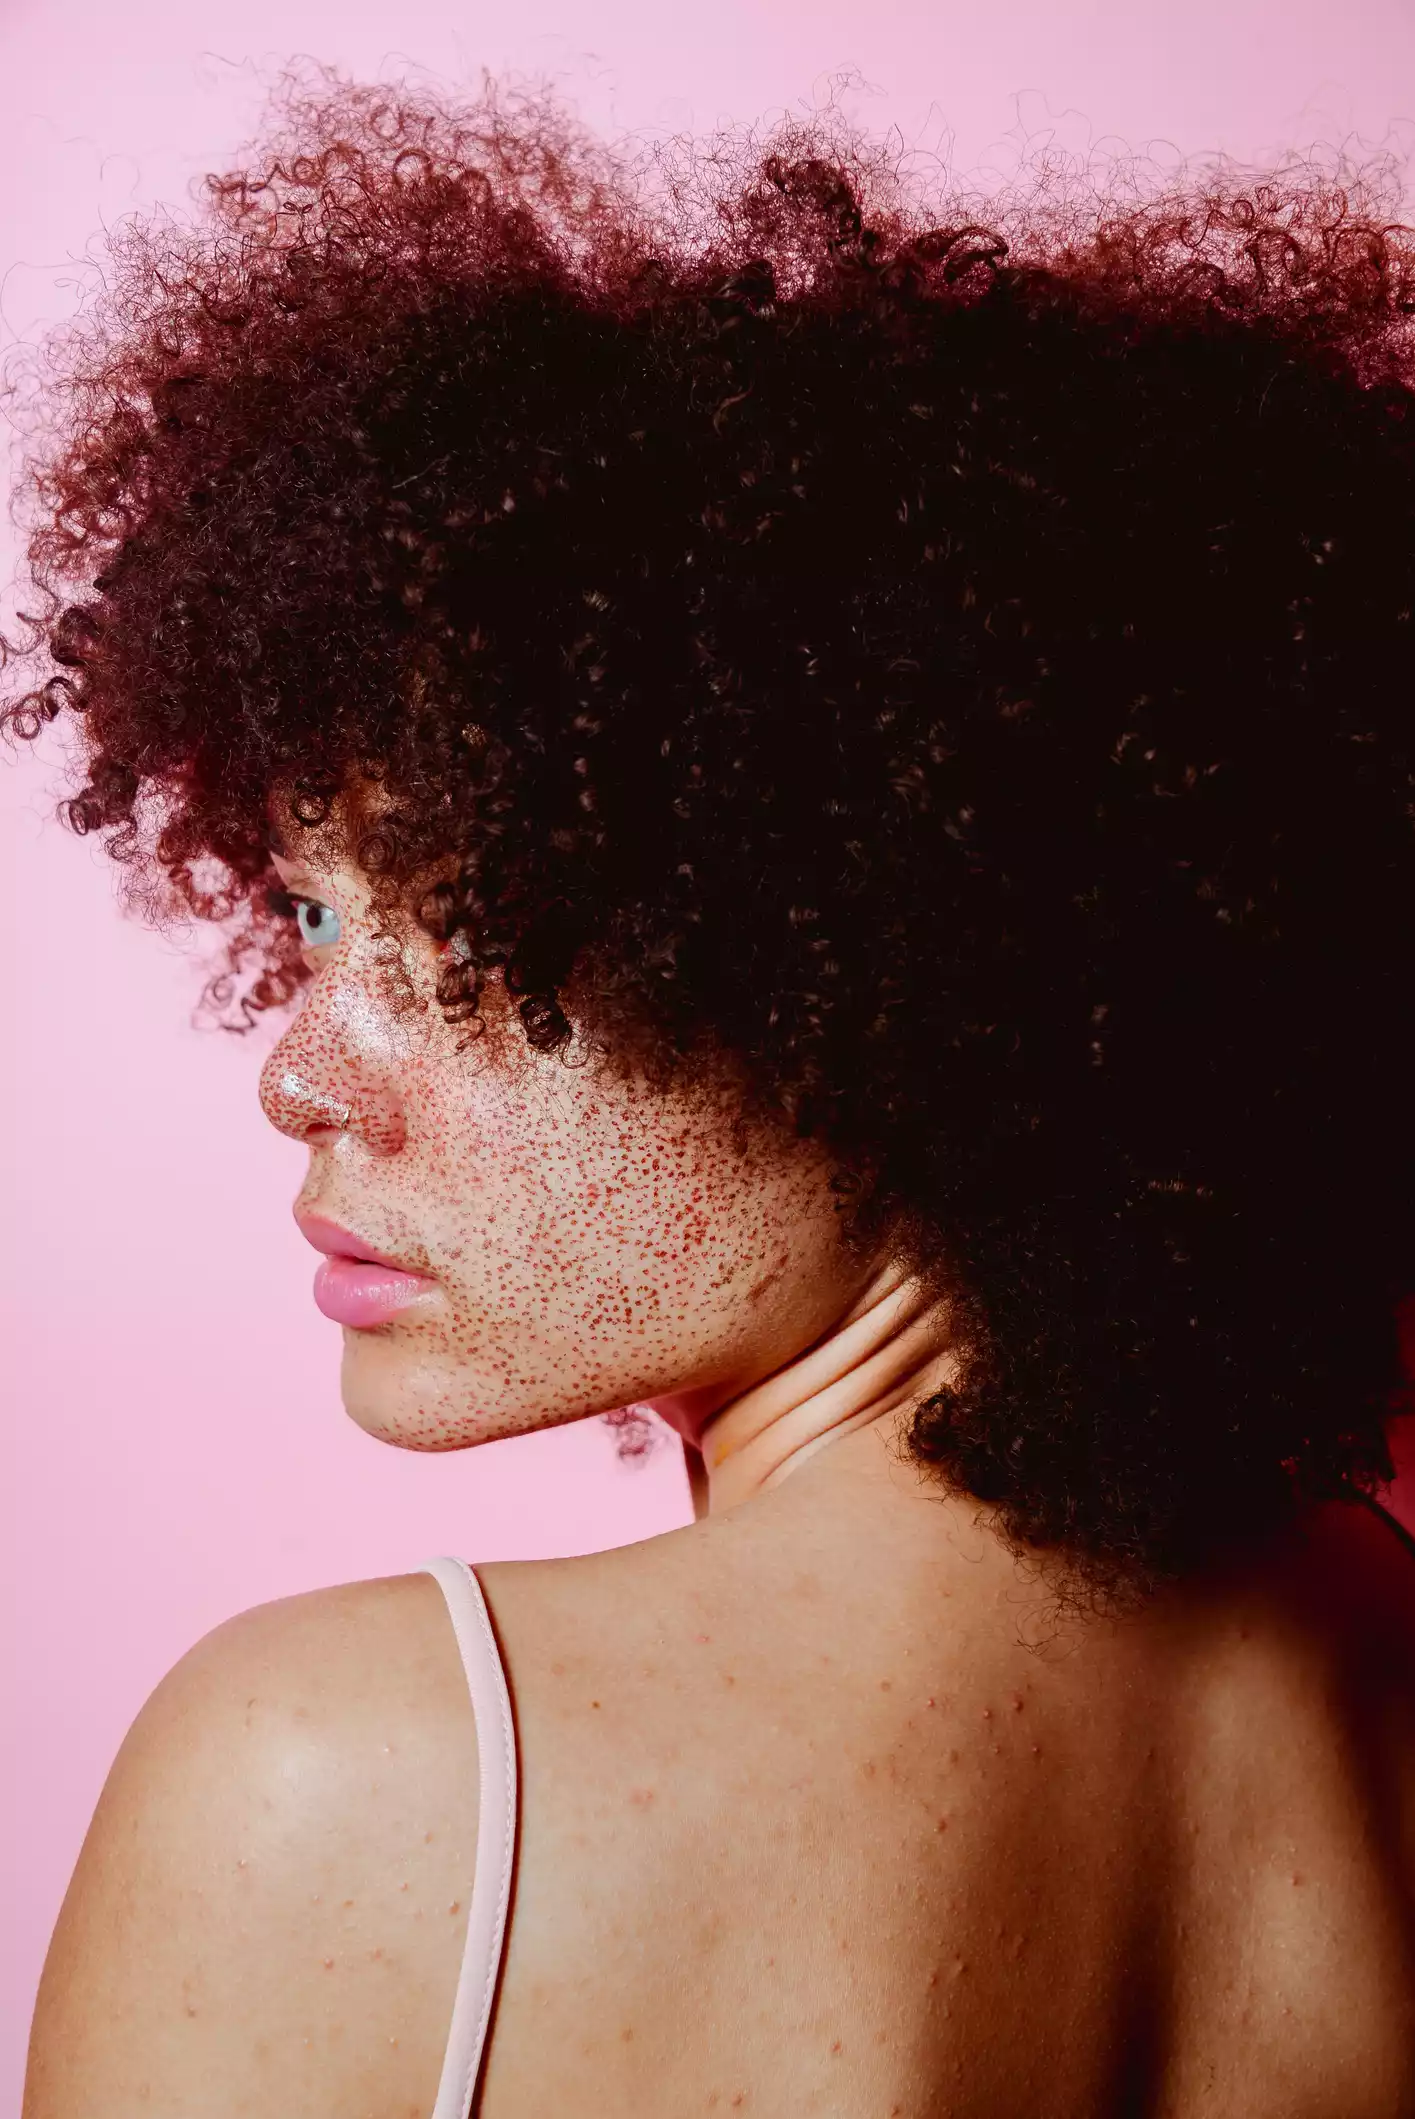 Profile of Young Womans Back with Natural Hair and Freckles